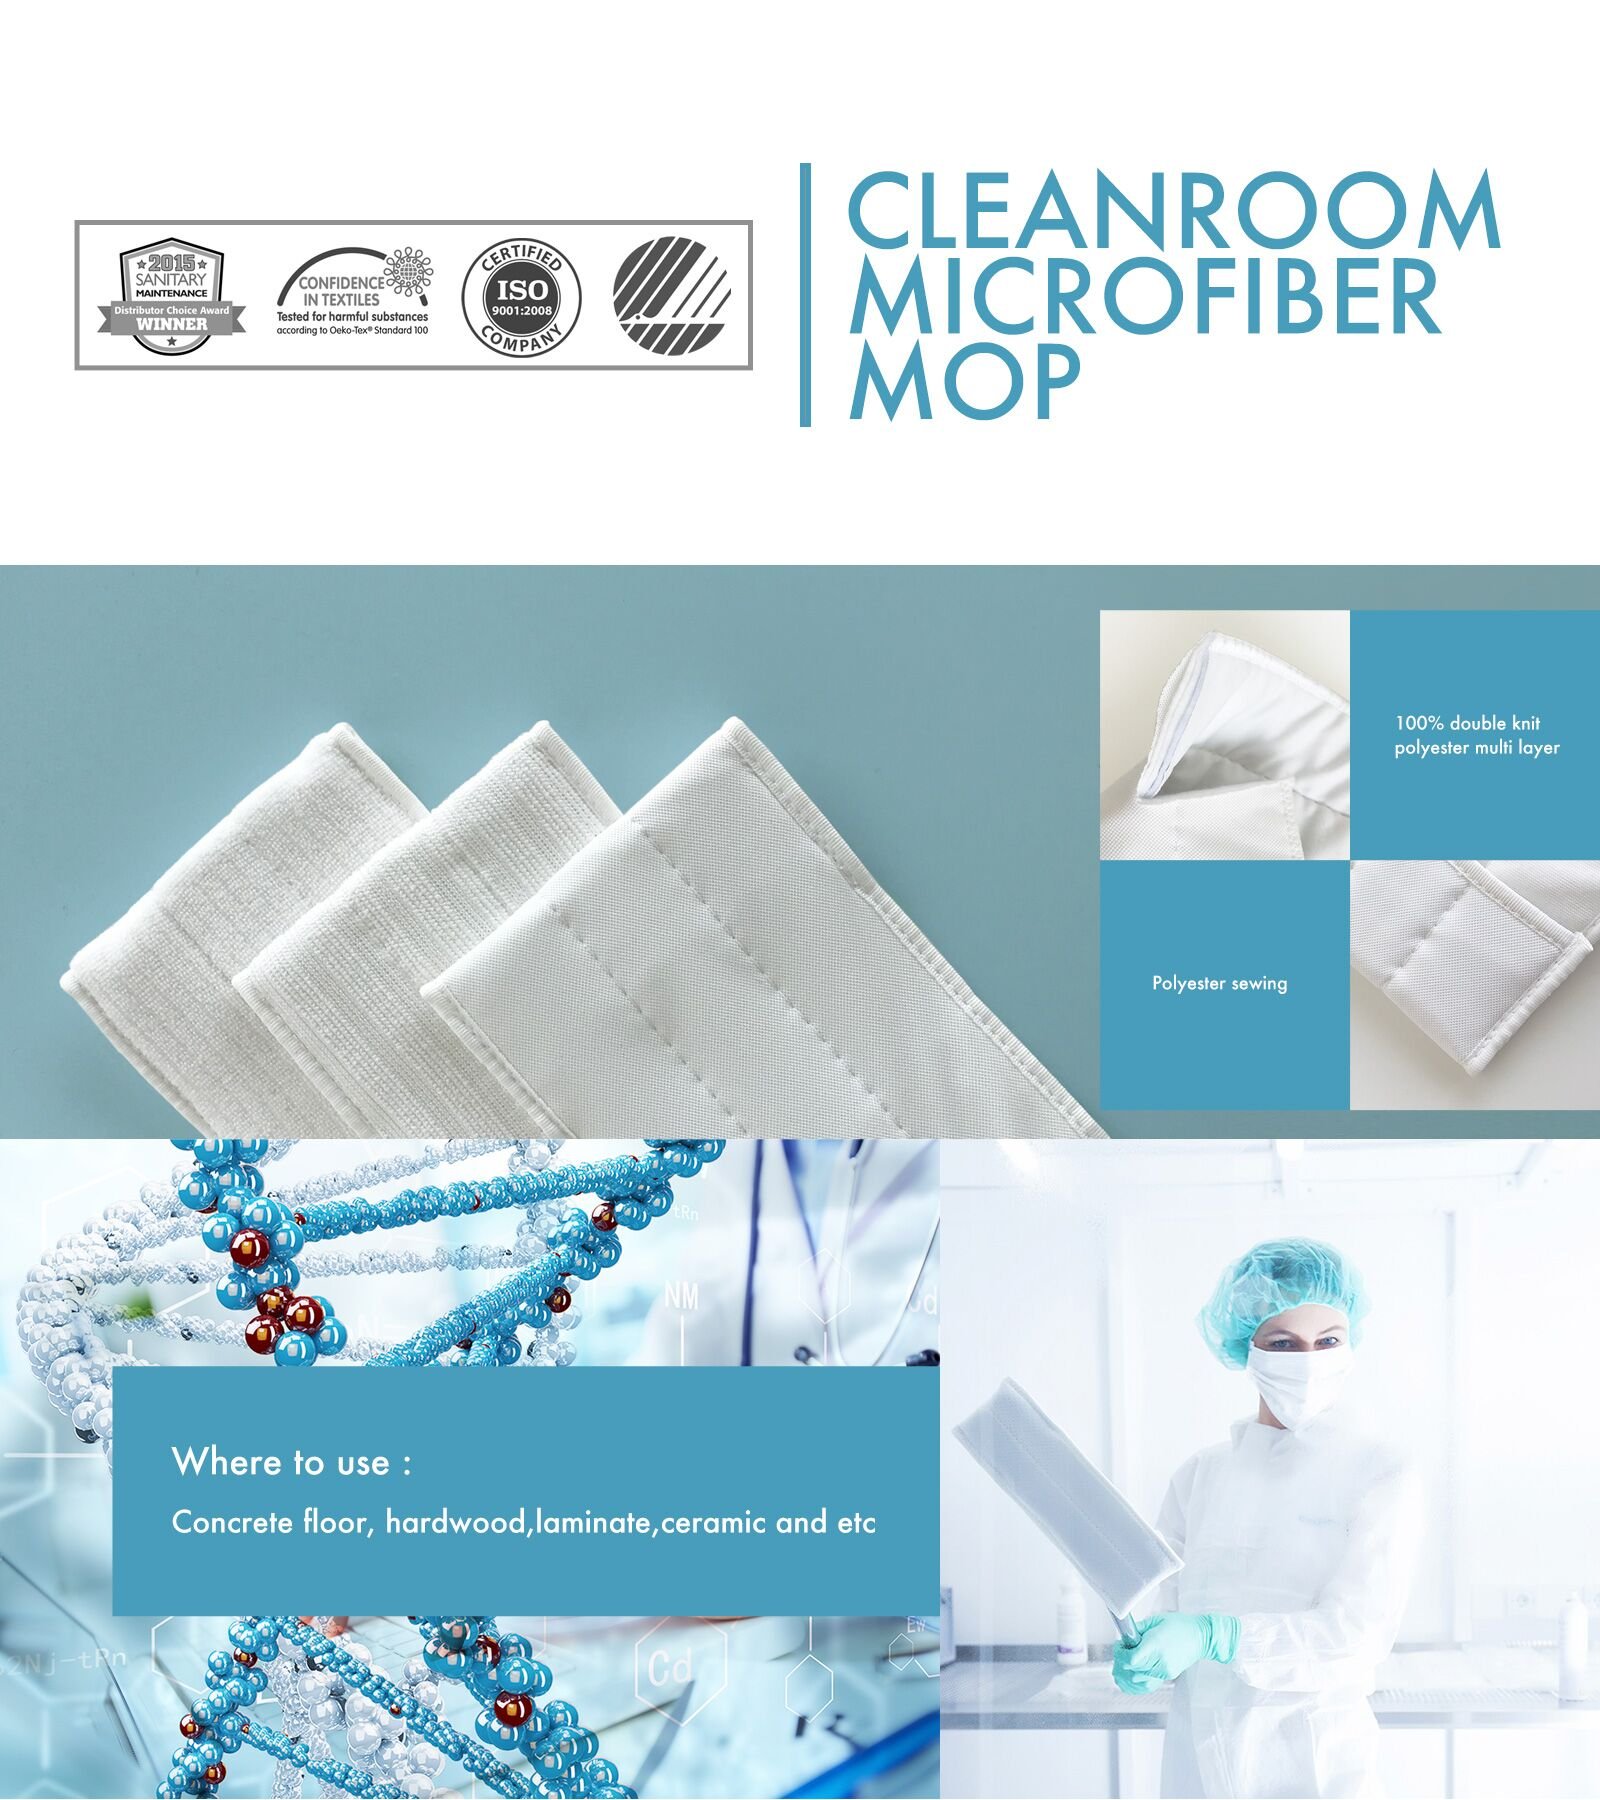 KINGMAX professional cleanroom mops and towels, special designed for cleanroom of high hygience standard.